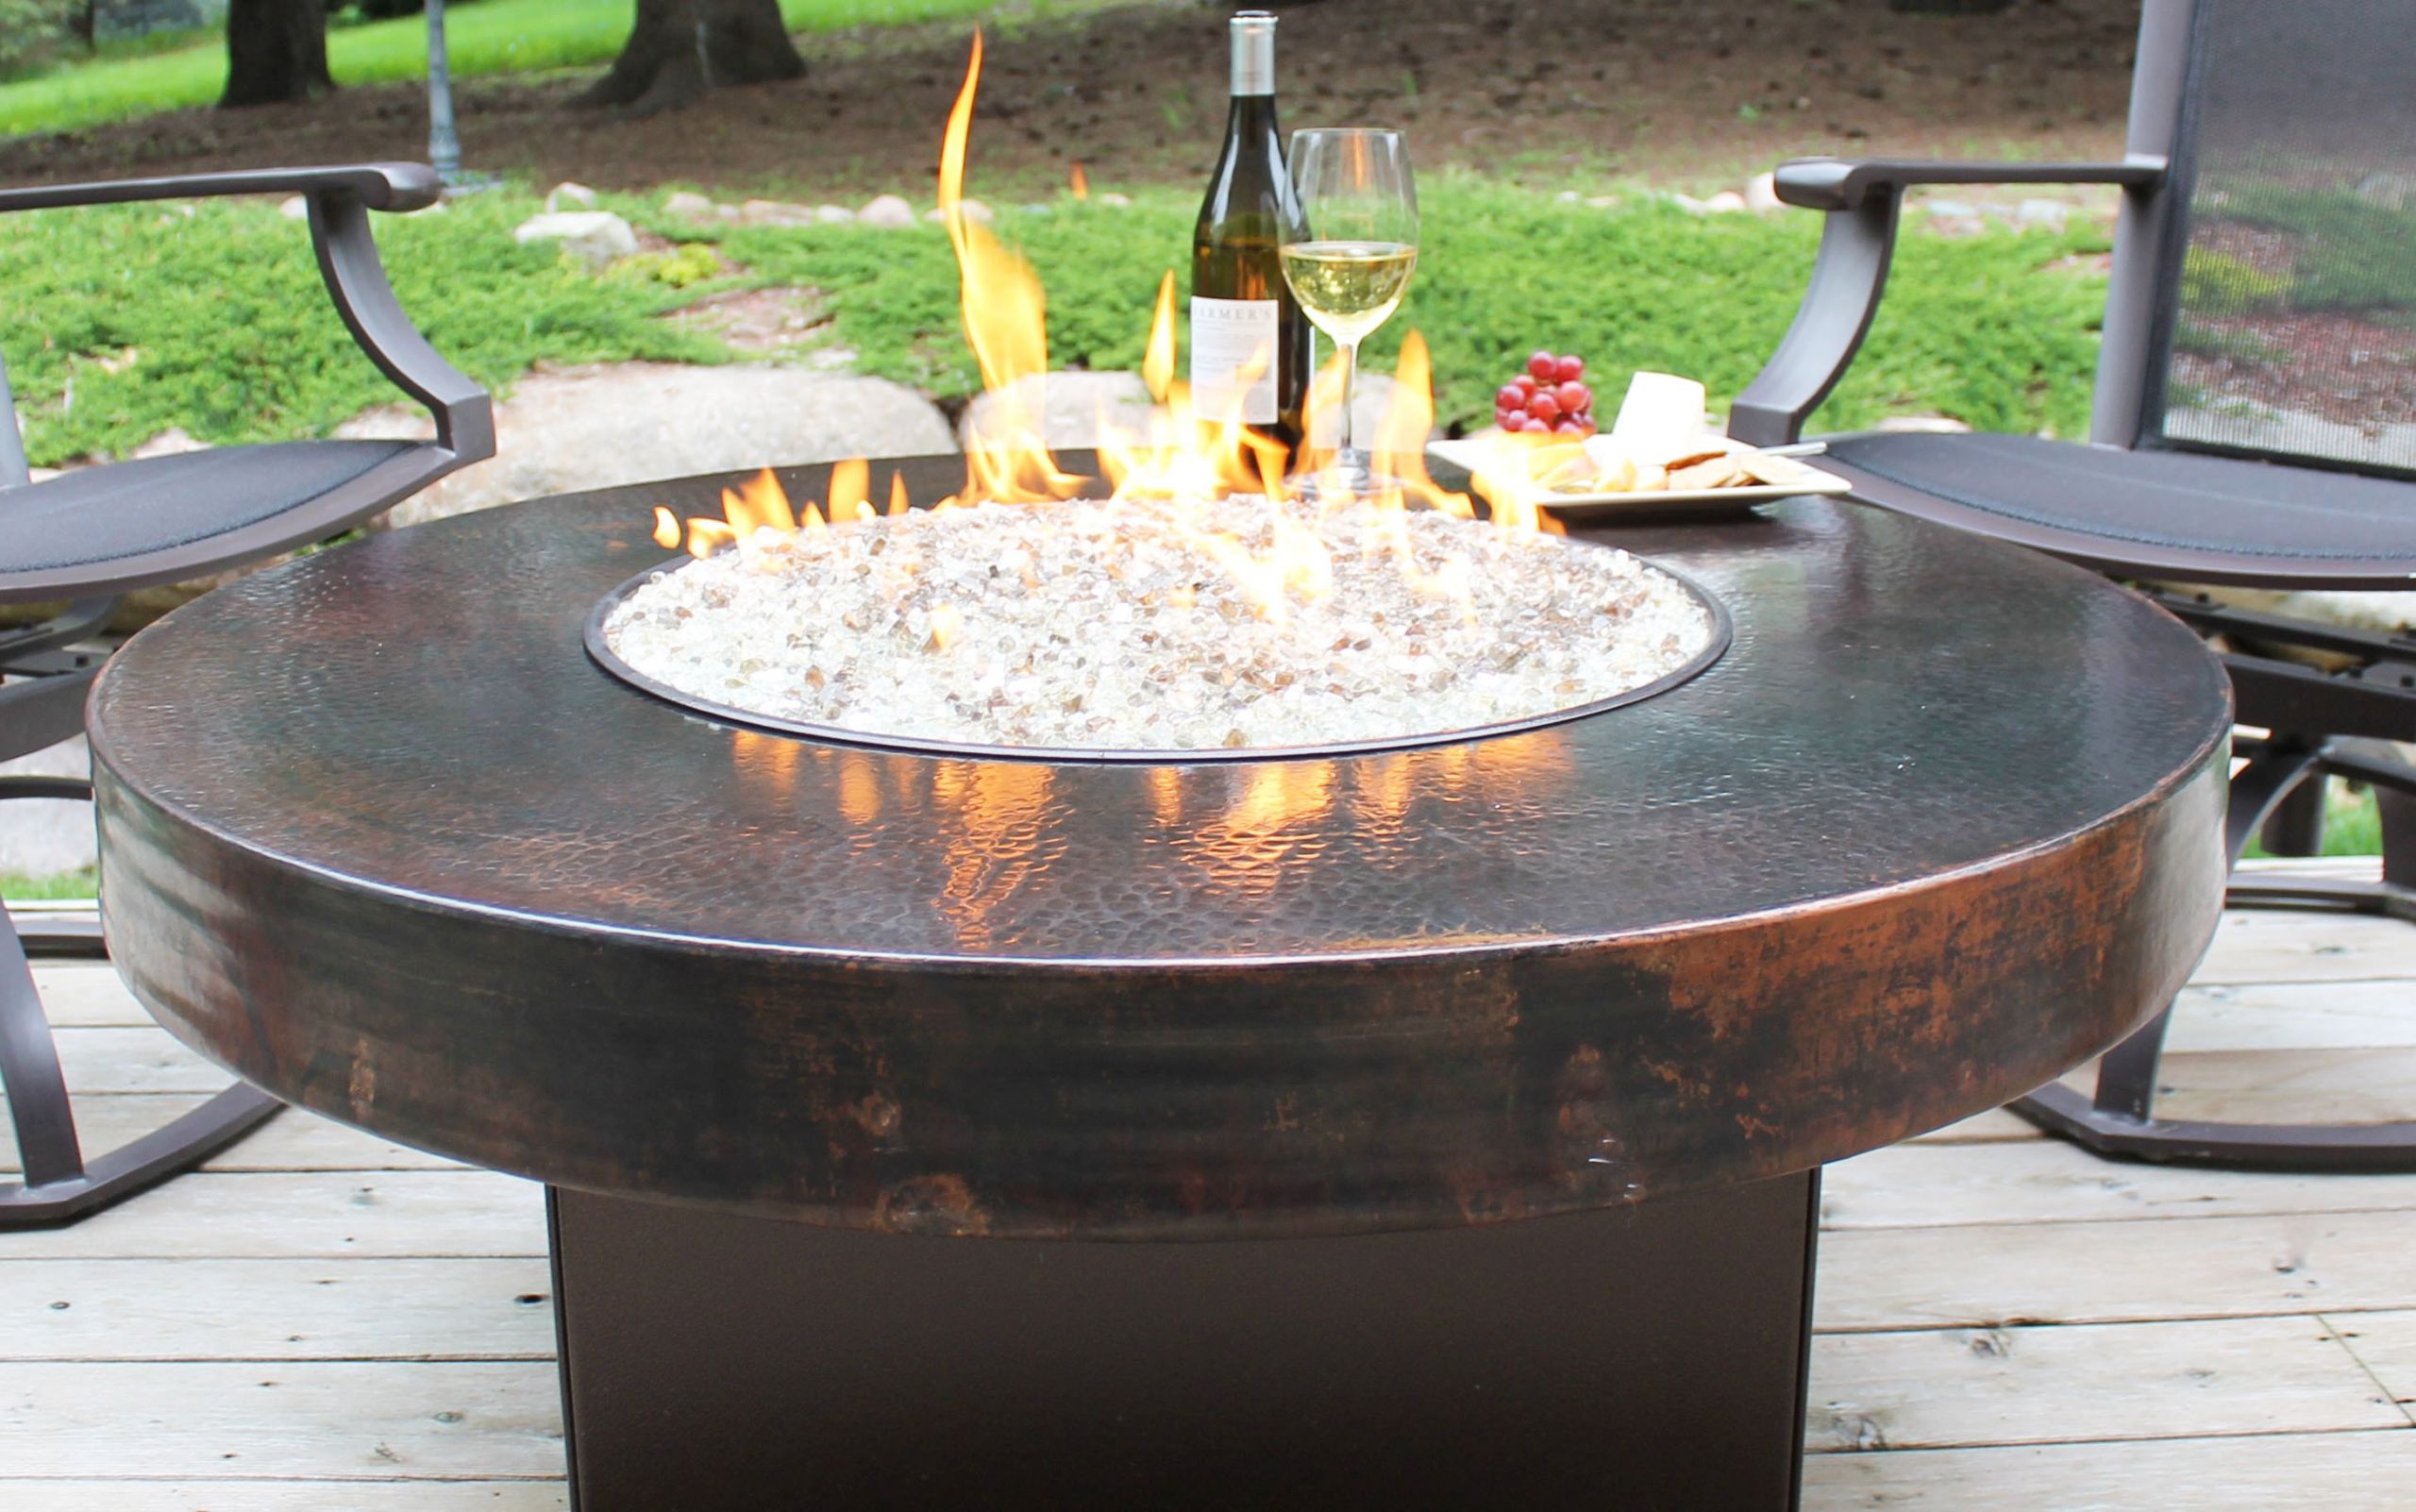 DIY Outdoor Gas Fireplace Kits
 How to Make Tabletop Fire Pit Kit DIY